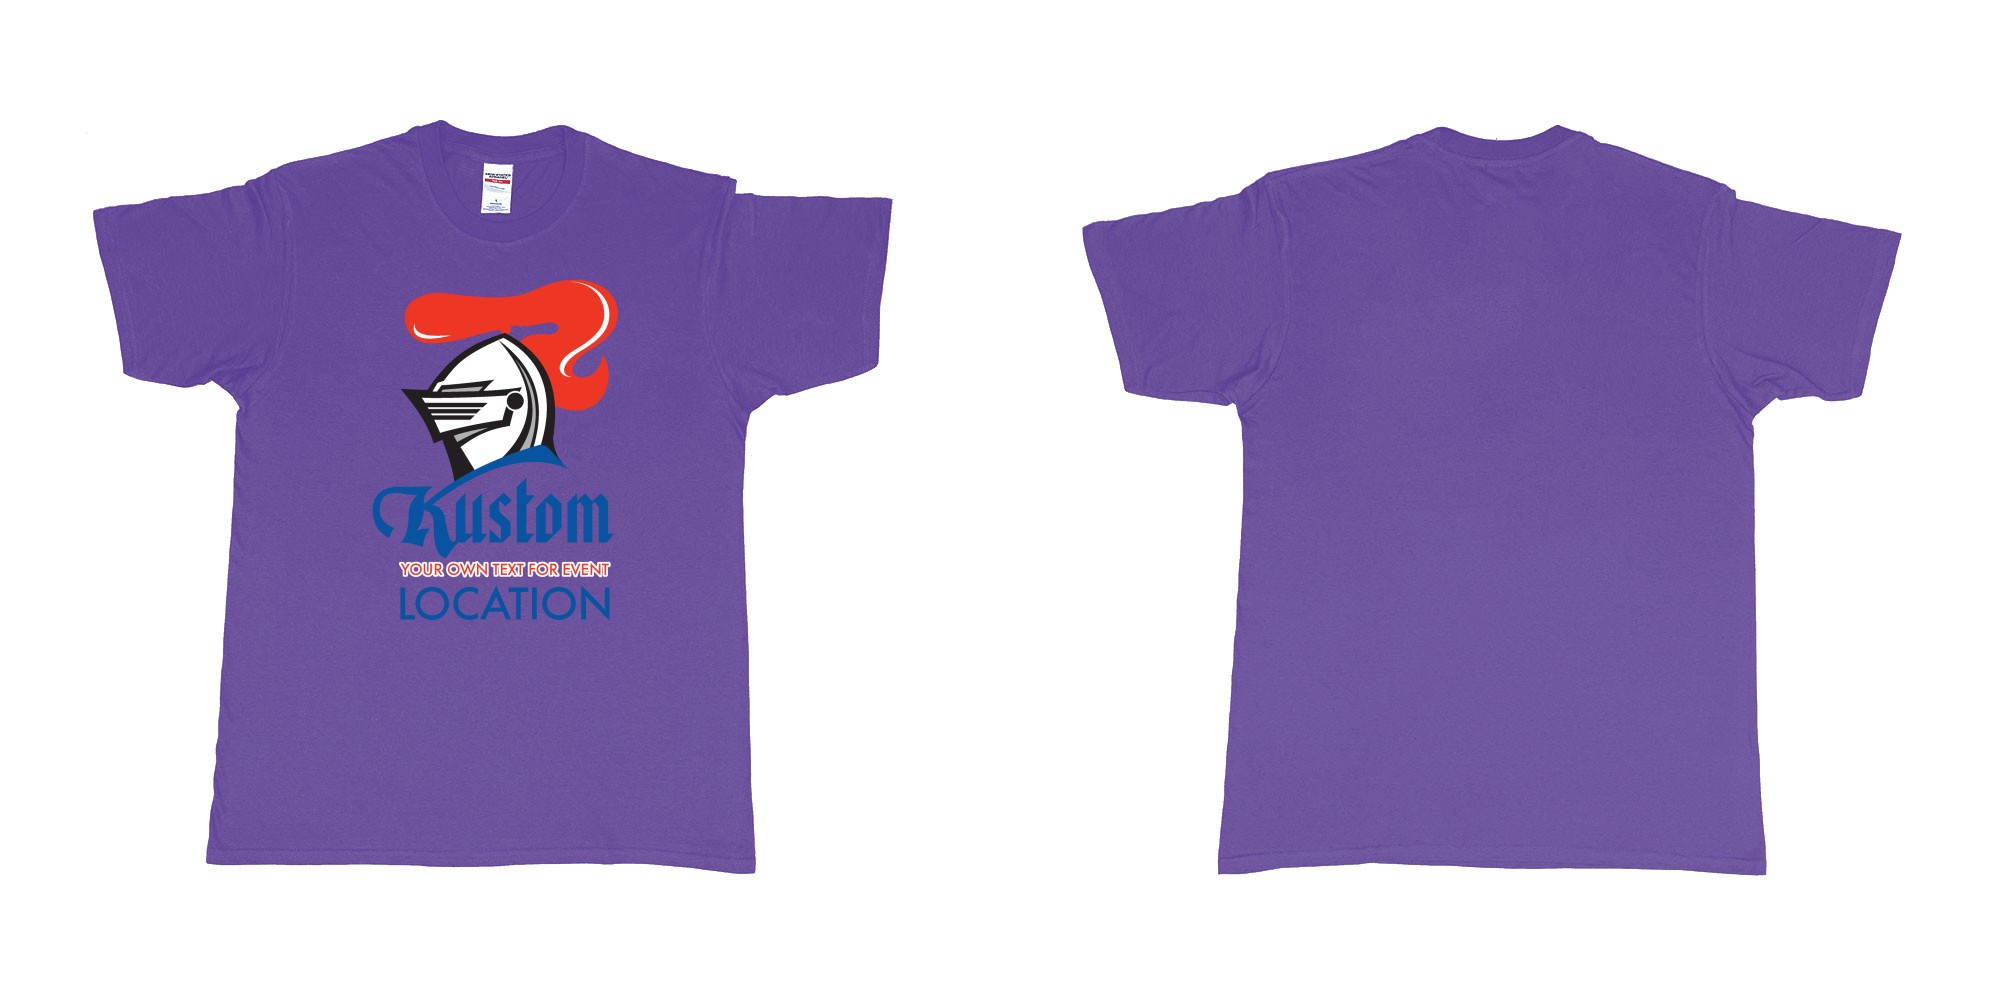 Custom tshirt design newcastle knights rugby league team custom event teeshirt in fabric color purple choice your own text made in Bali by The Pirate Way